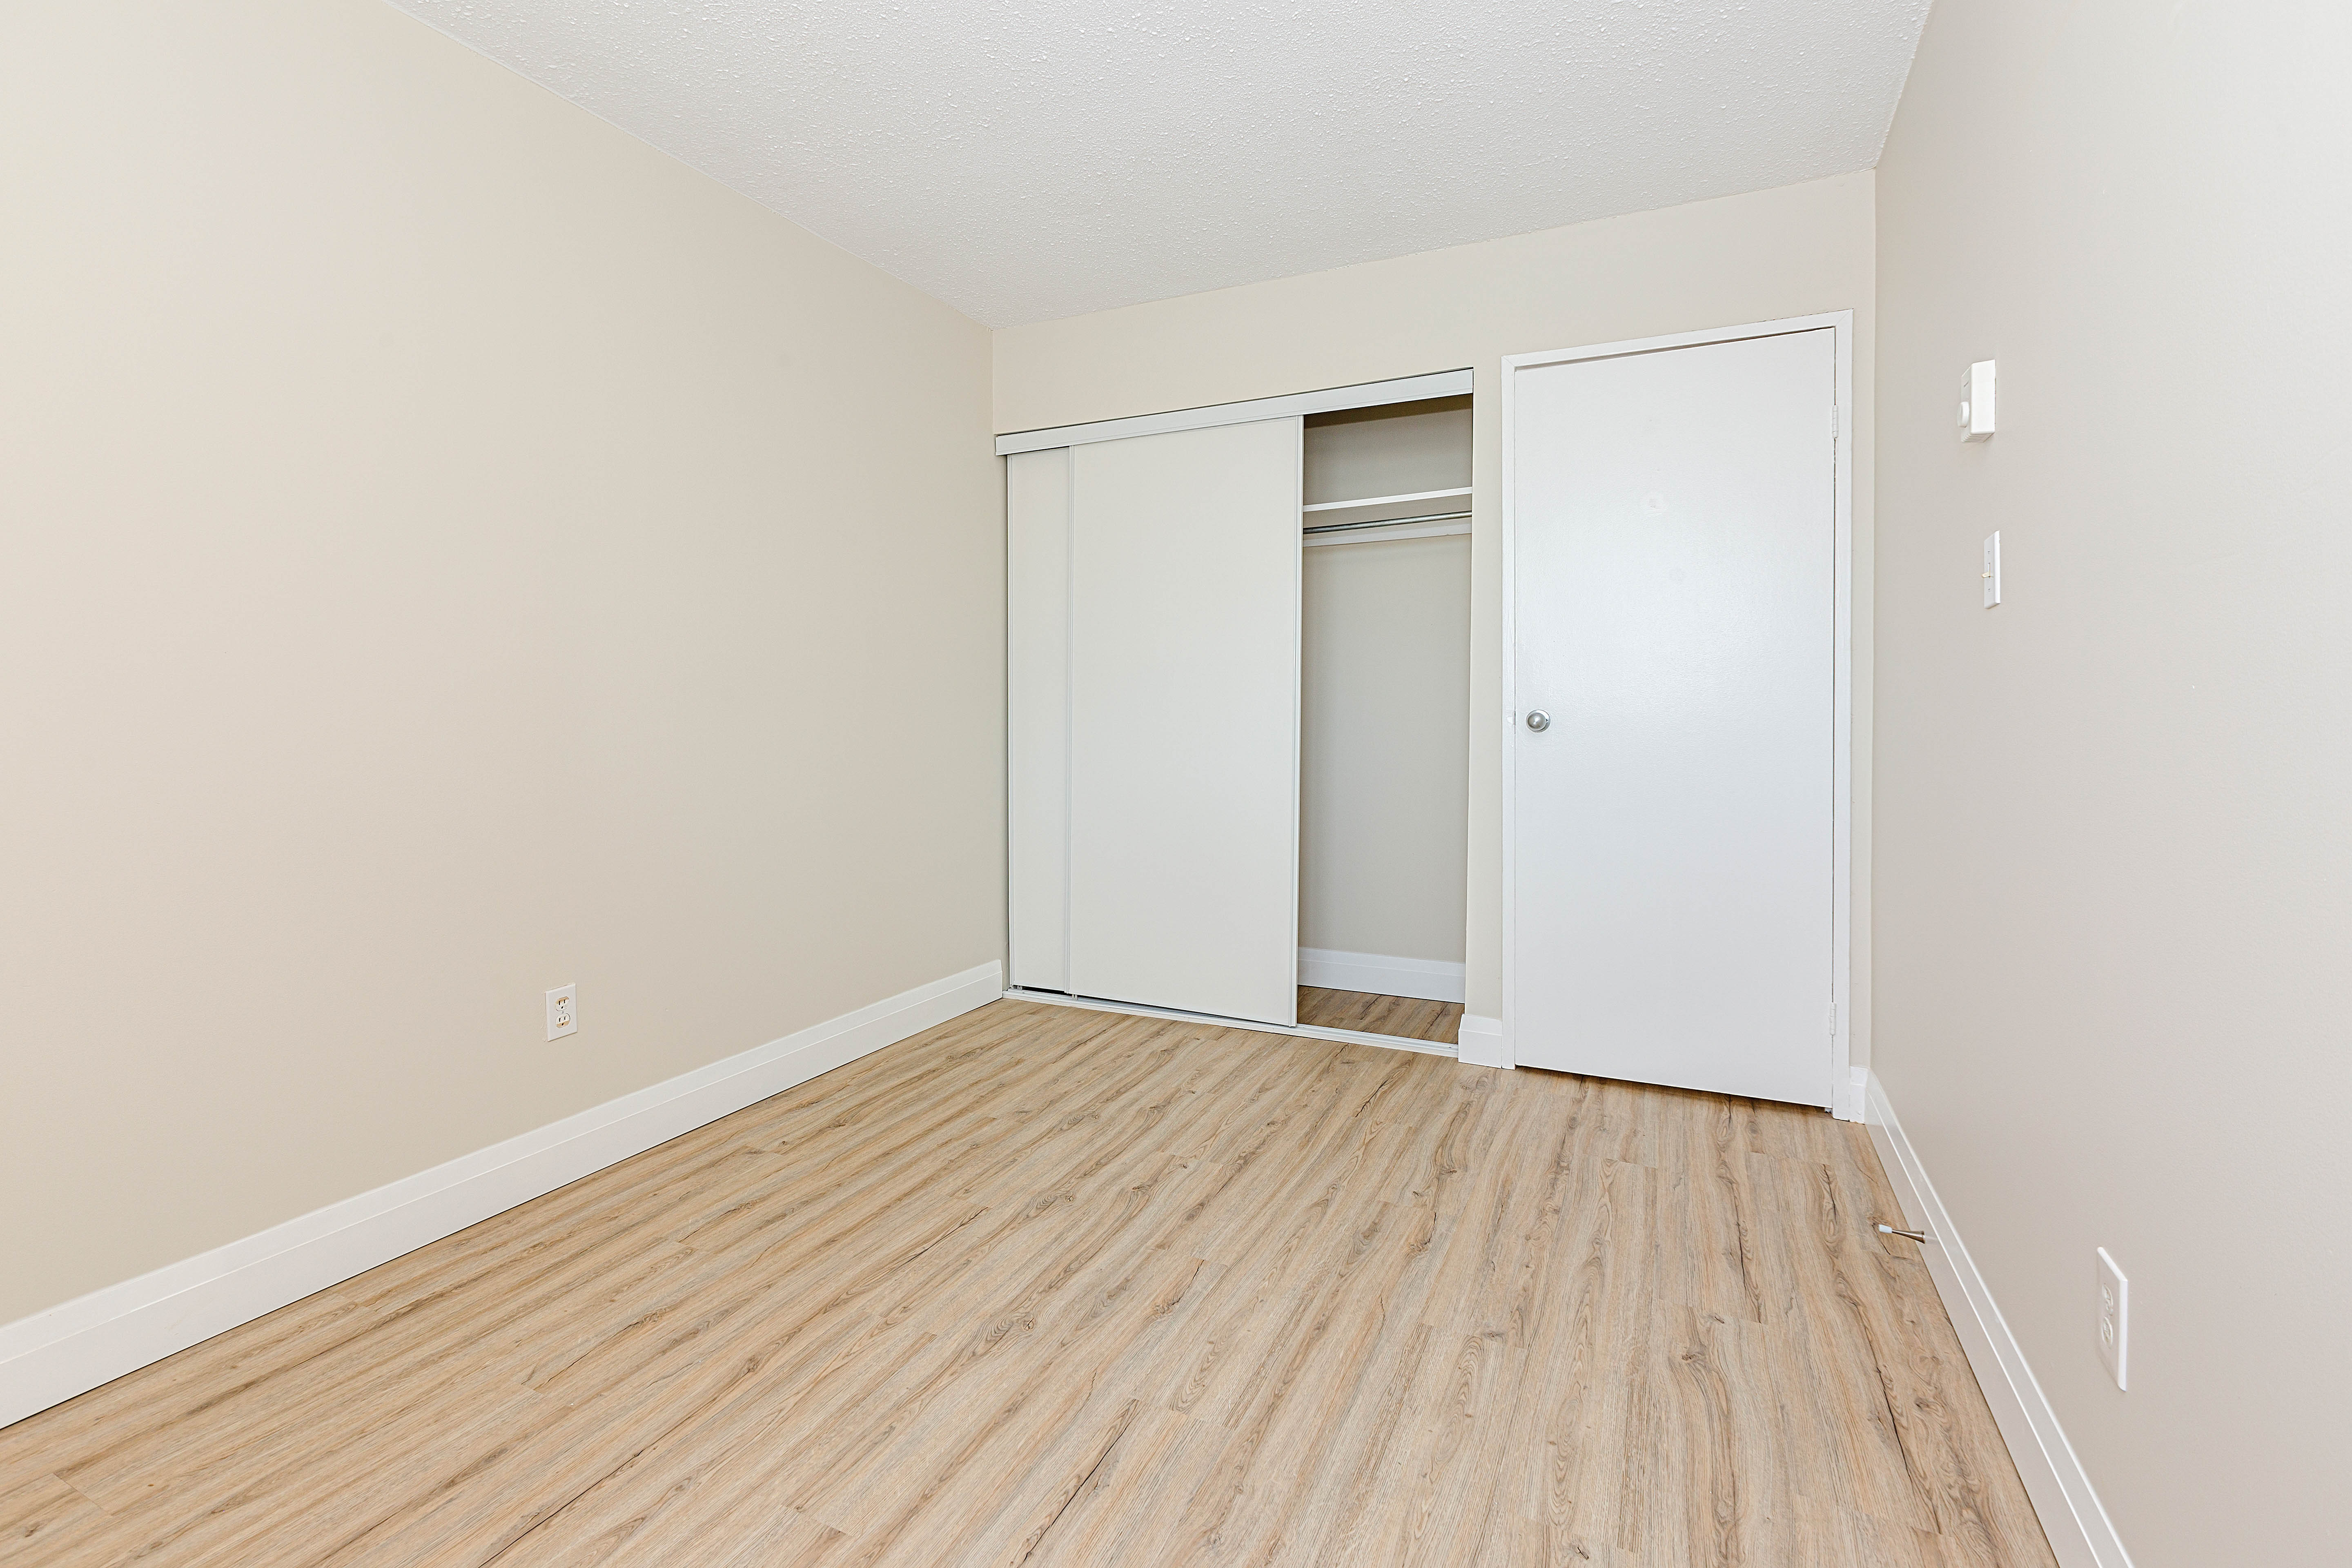 SkyLiving RiversideApartments 1214RiversideDR Timmins Unit111 TwoBed OneBath 0003 bedroom1